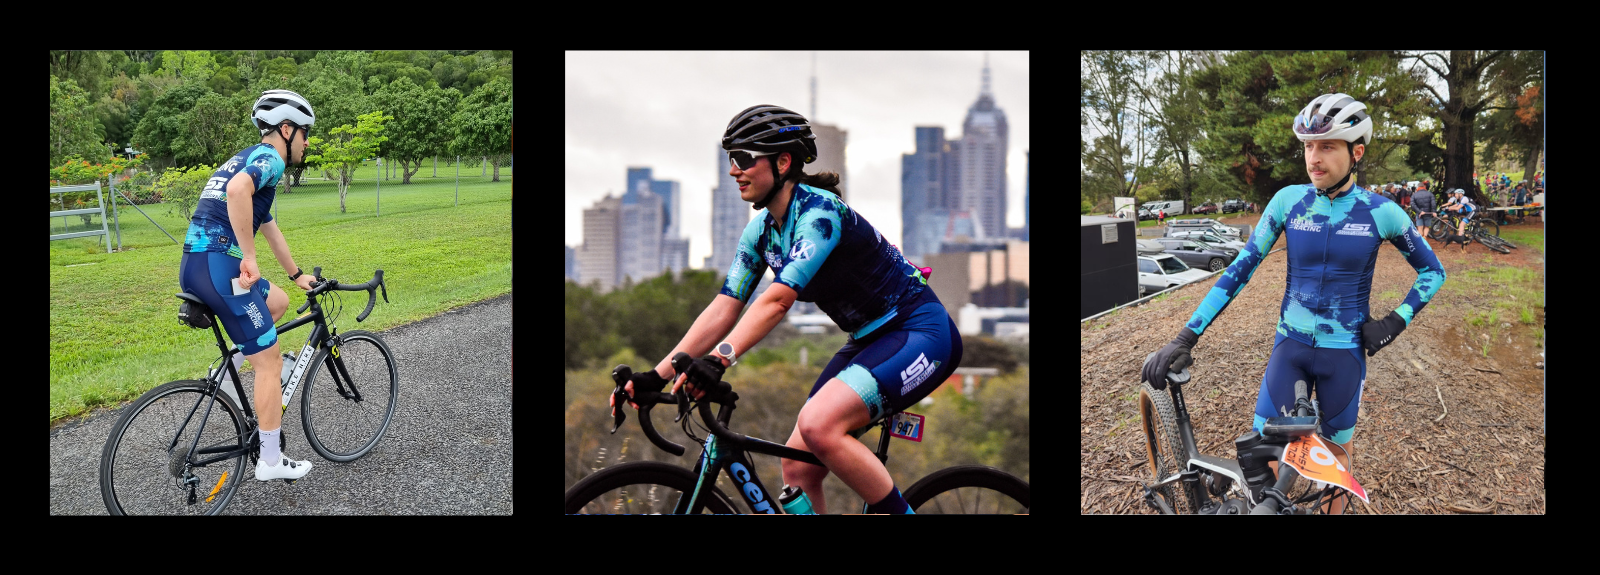 FOHER Co Custom Cycle Kit for LegLeg CX, MTB and Road Racing Team, Melbourne